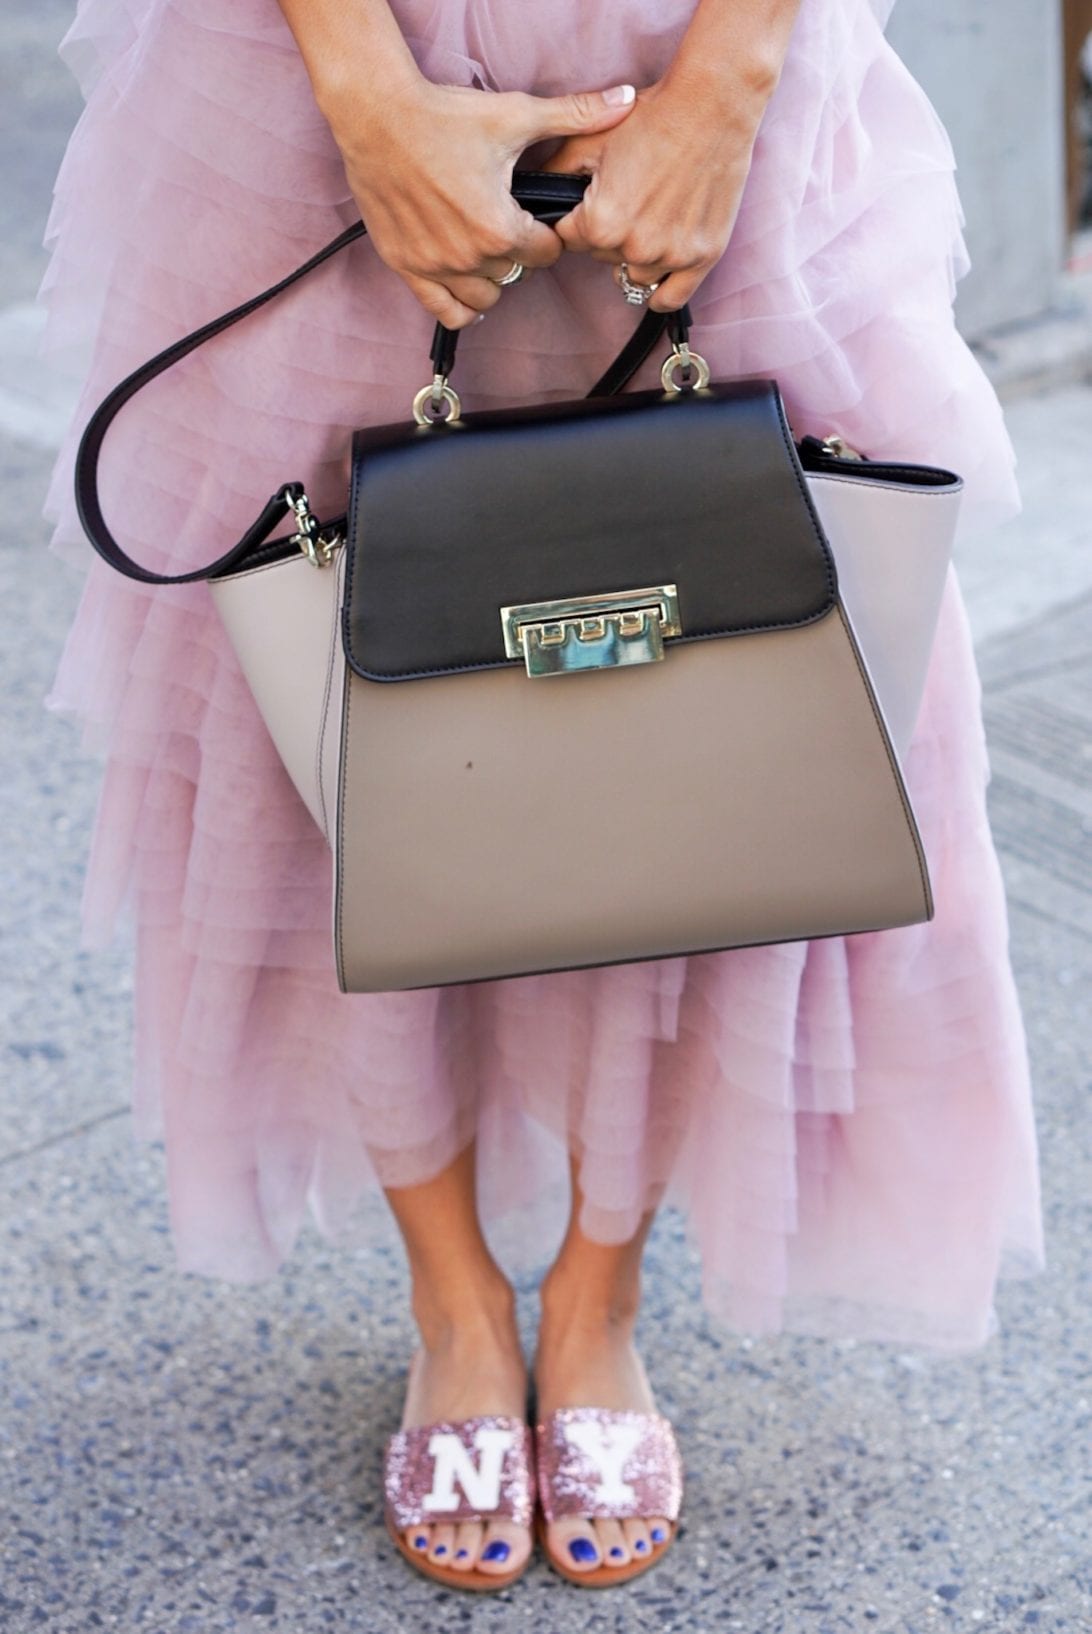 NYC STREET STYLE, New York FASHION WEEK, New York CITY, NYFW 2017, NYFW STREET STYLE, STREET STYLE, FEMINIST, TULLE SKIRT, SEX AND THE CITY OUTFIT, NY GLITTER FLATS, ZAC ZAC POSEN BAG